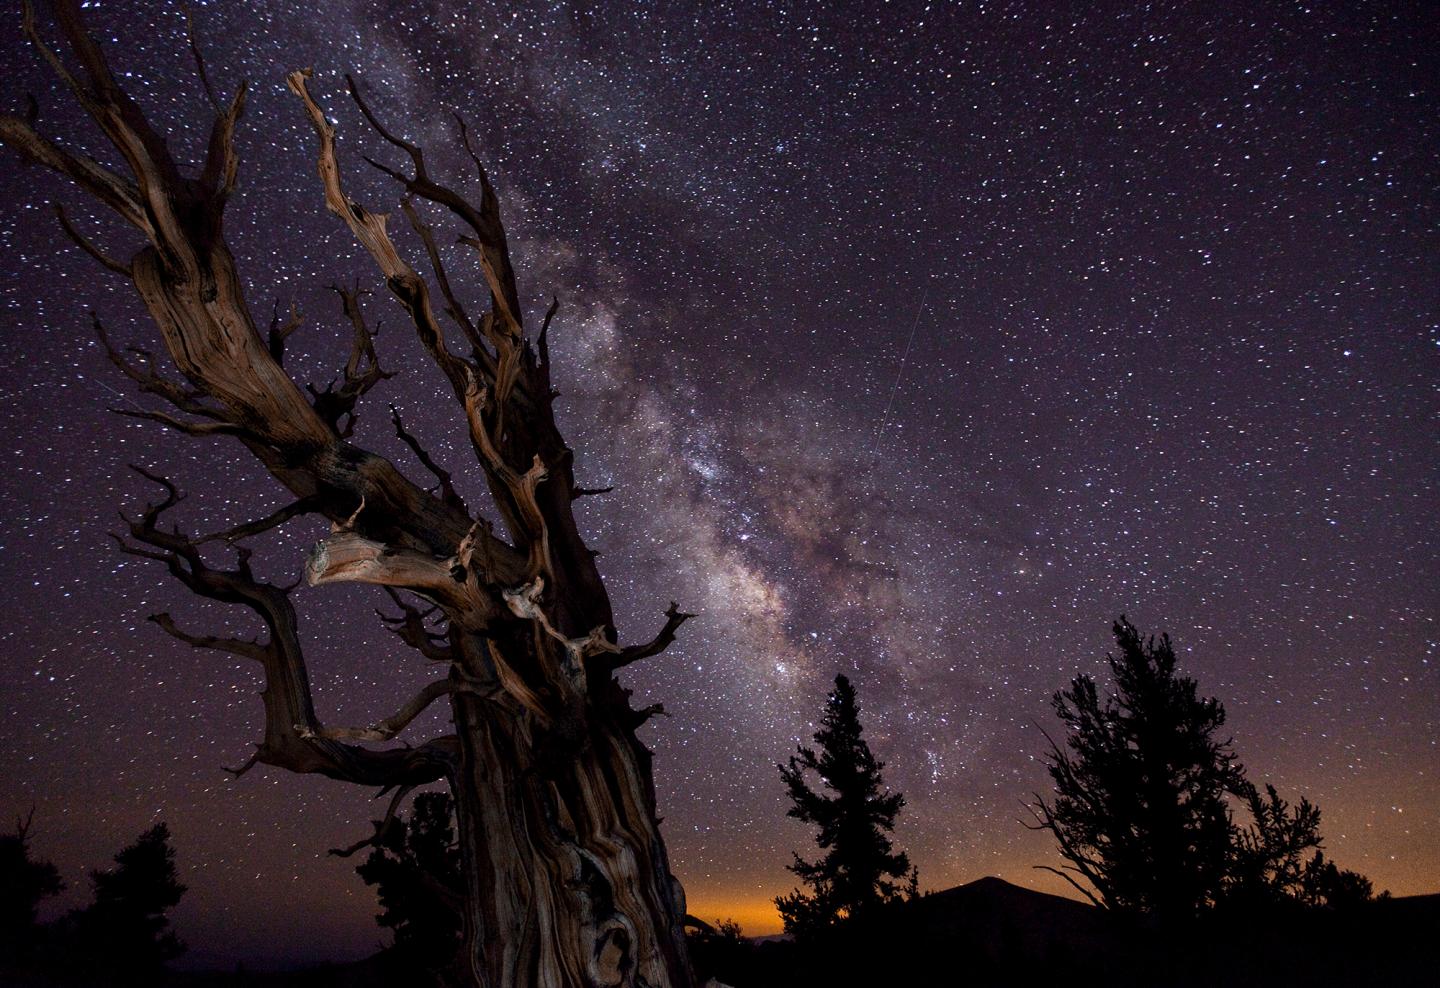 A night skyscape with a beautiful deep purple sky and bright clouds of stars. Bare wooden branches are silhouetted in the foreground